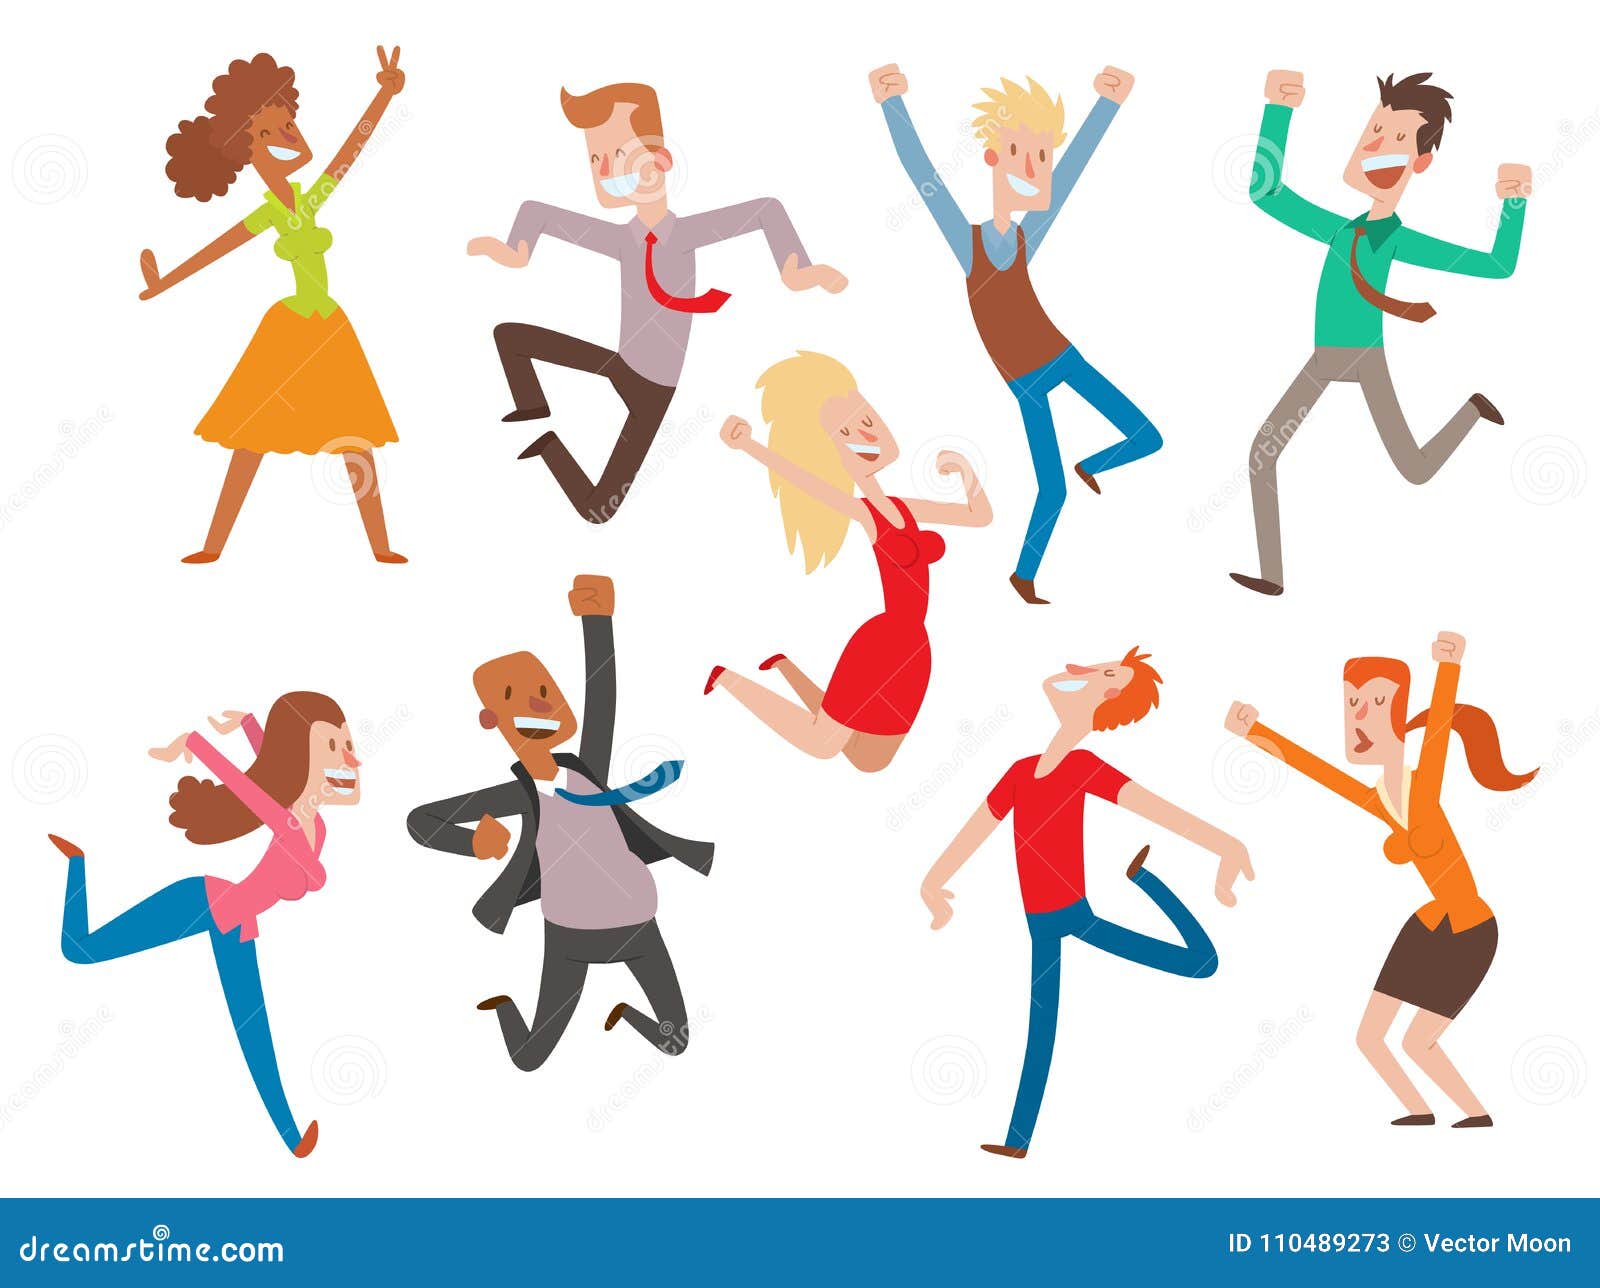 Vector People Jumping Celebration Party Illustration. Happy Man and ...